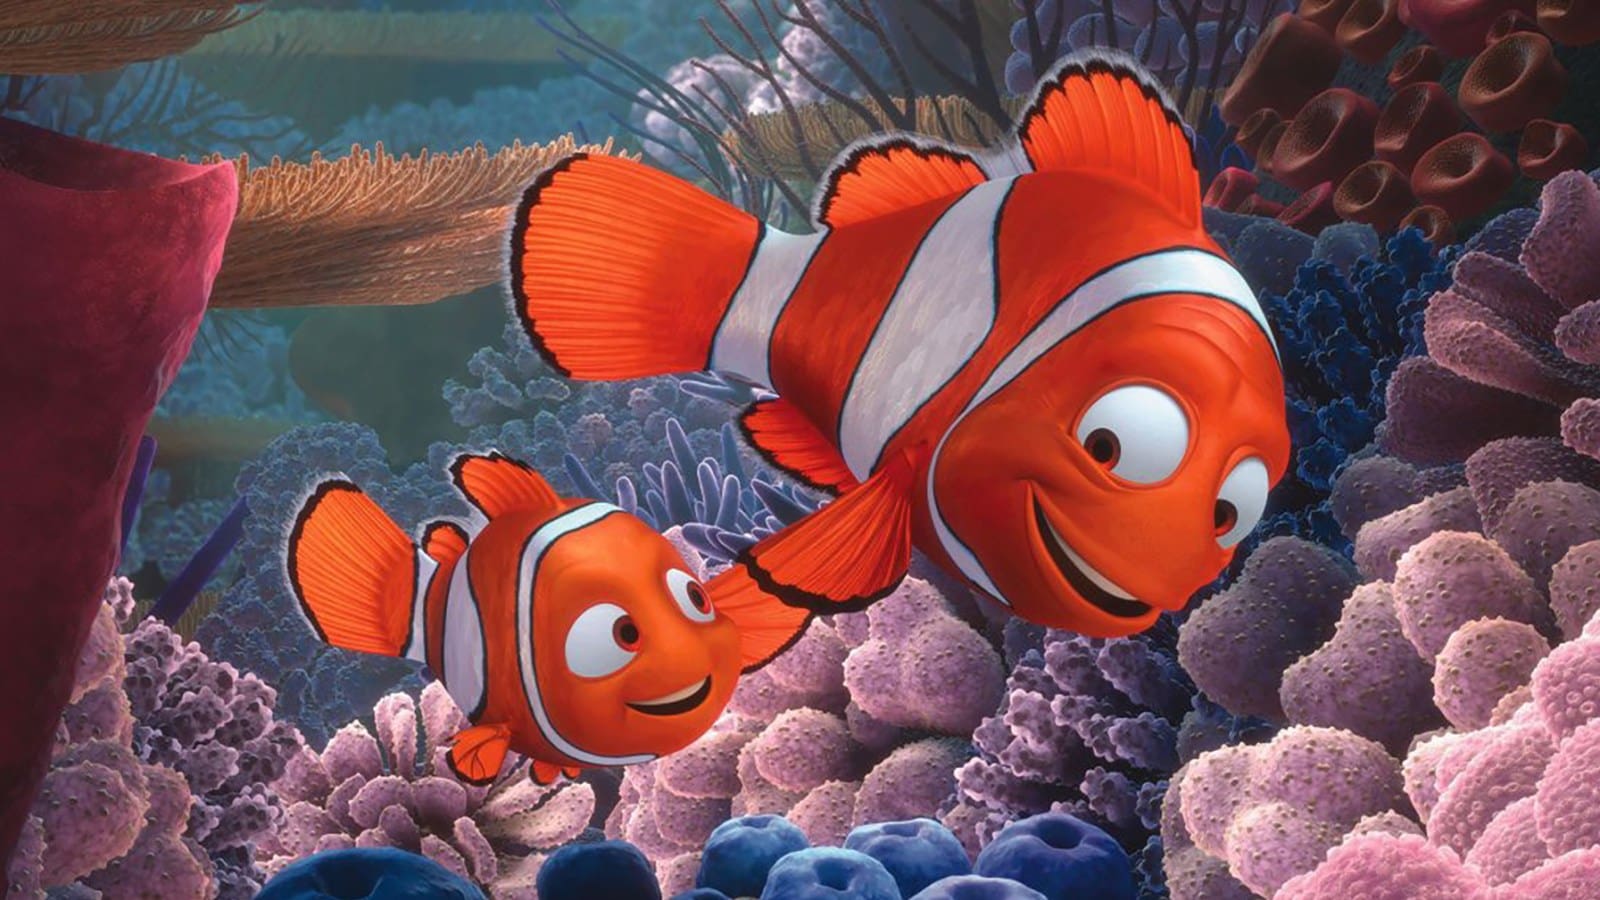 Fans React to Pixar Considering Reboots of Classic Films Like Finding Nemo